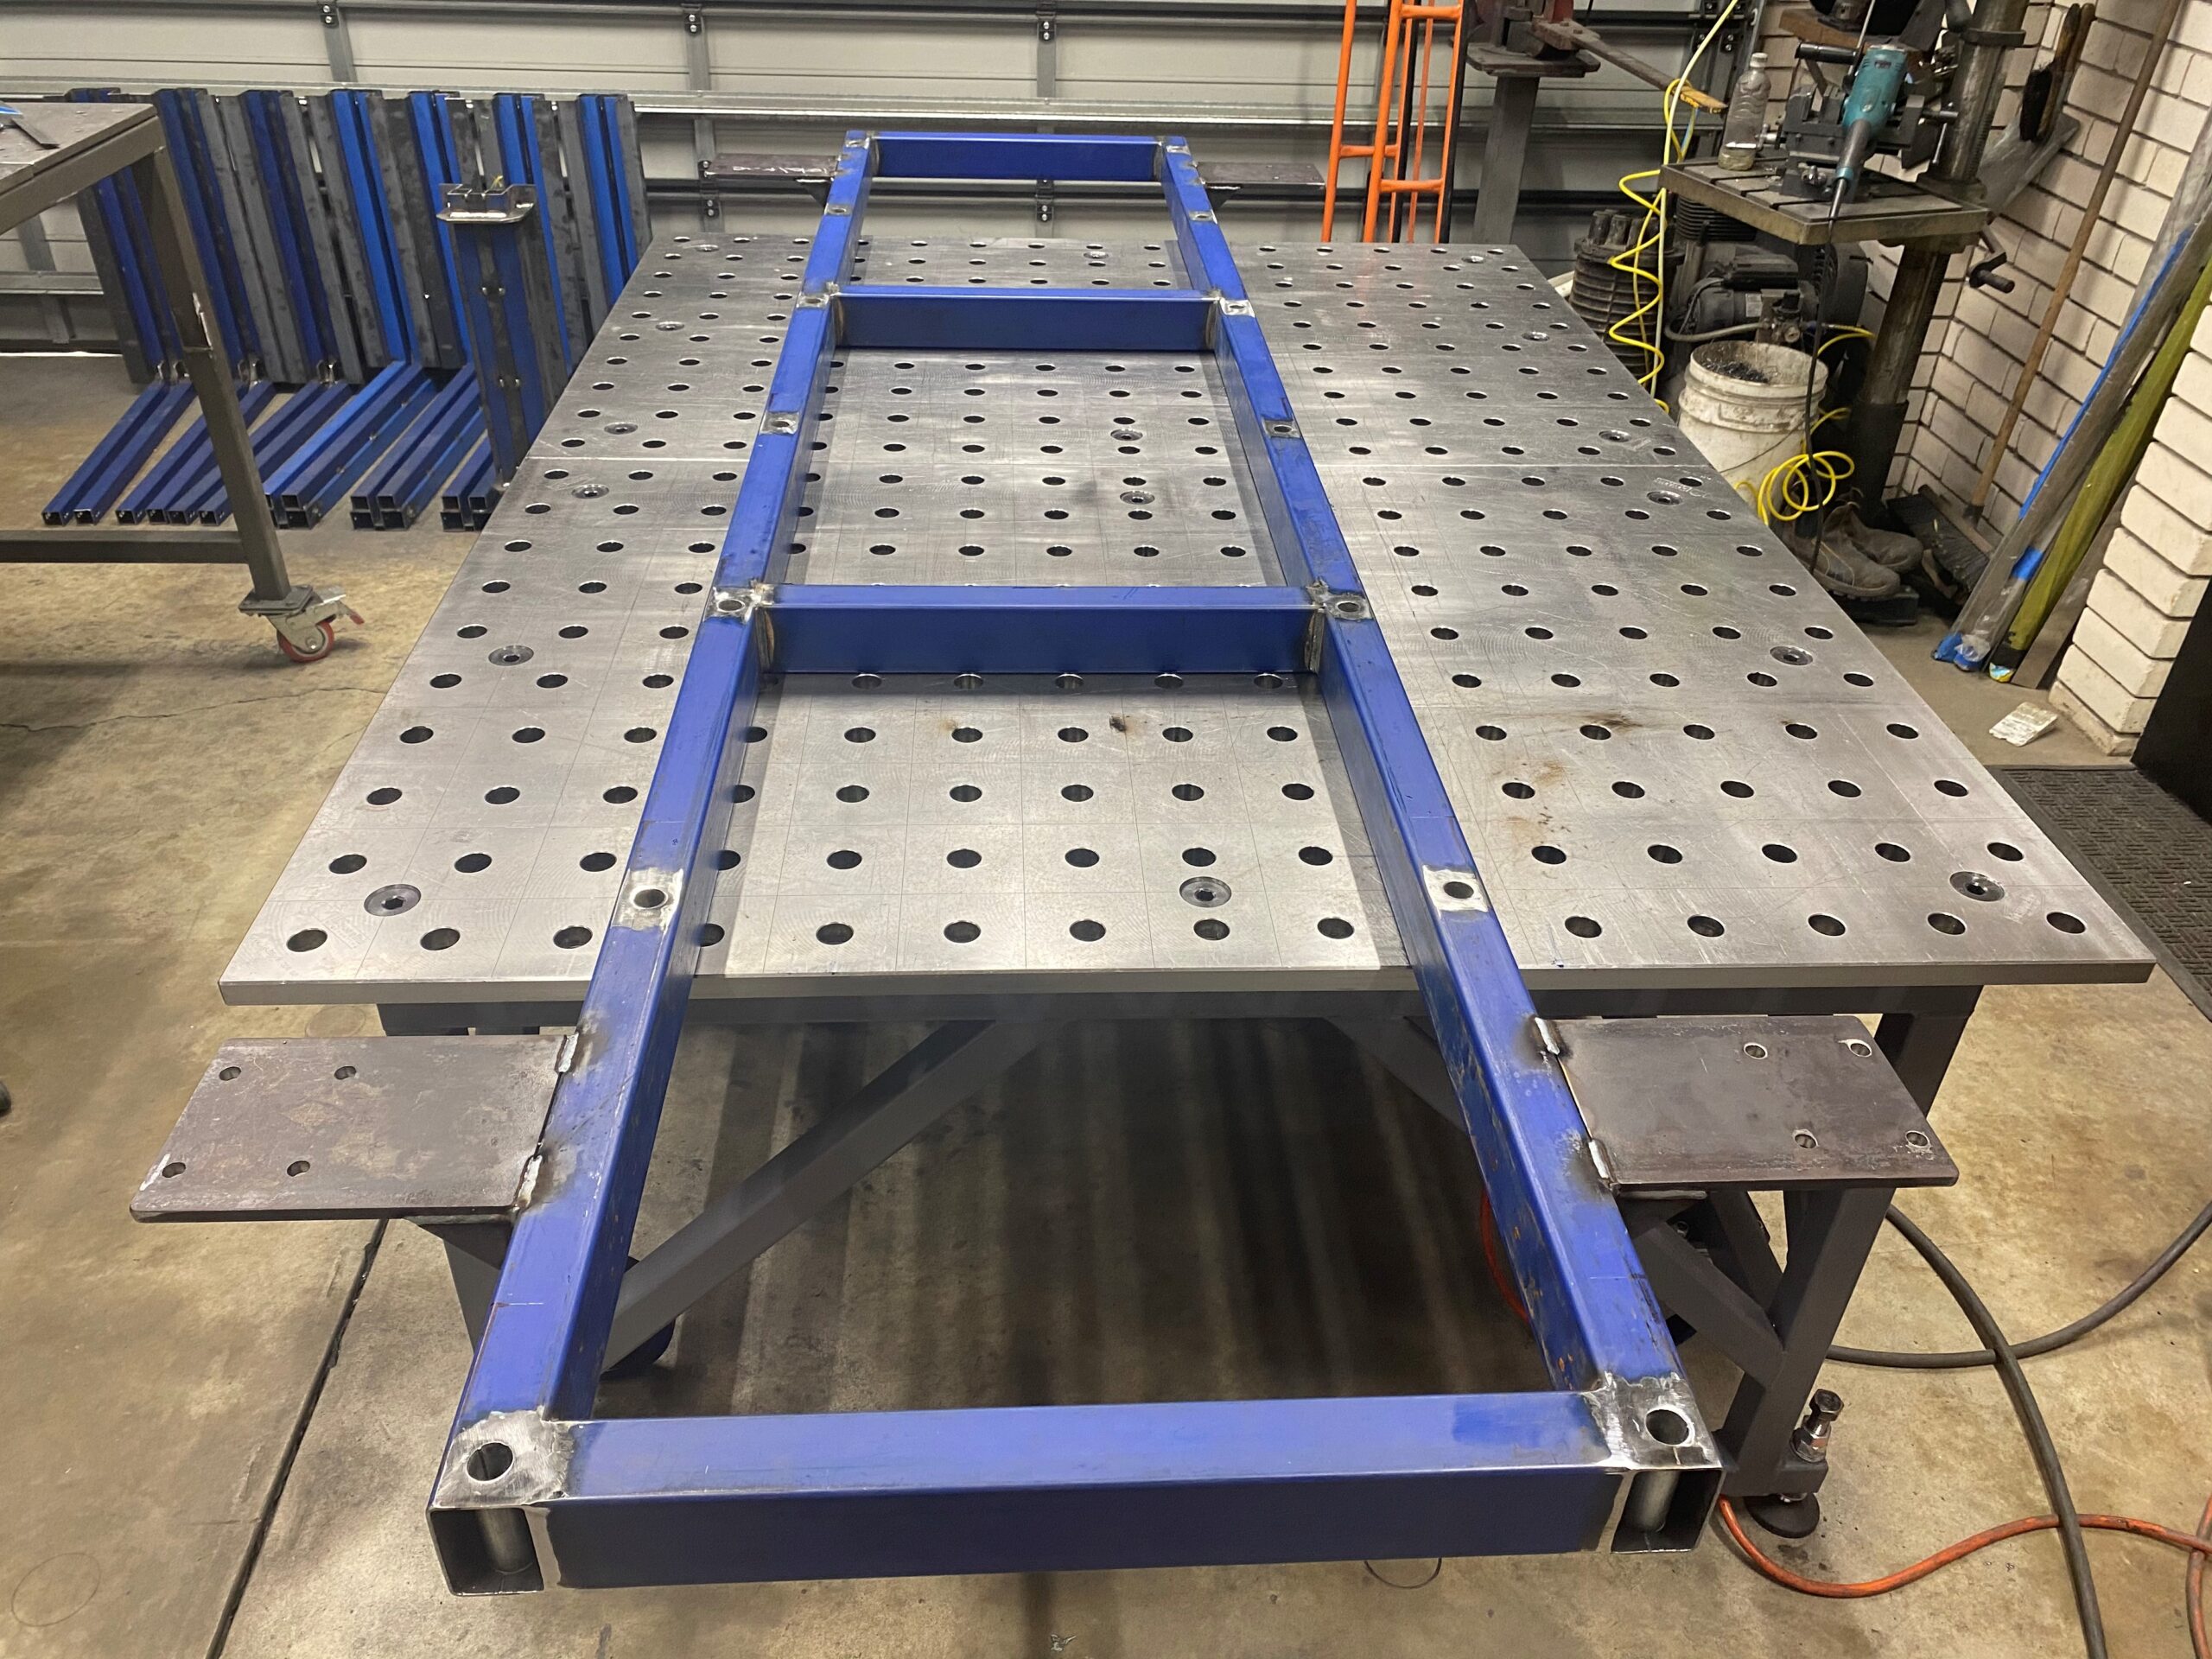 Assembling and welding the trolley base for the conduit jig